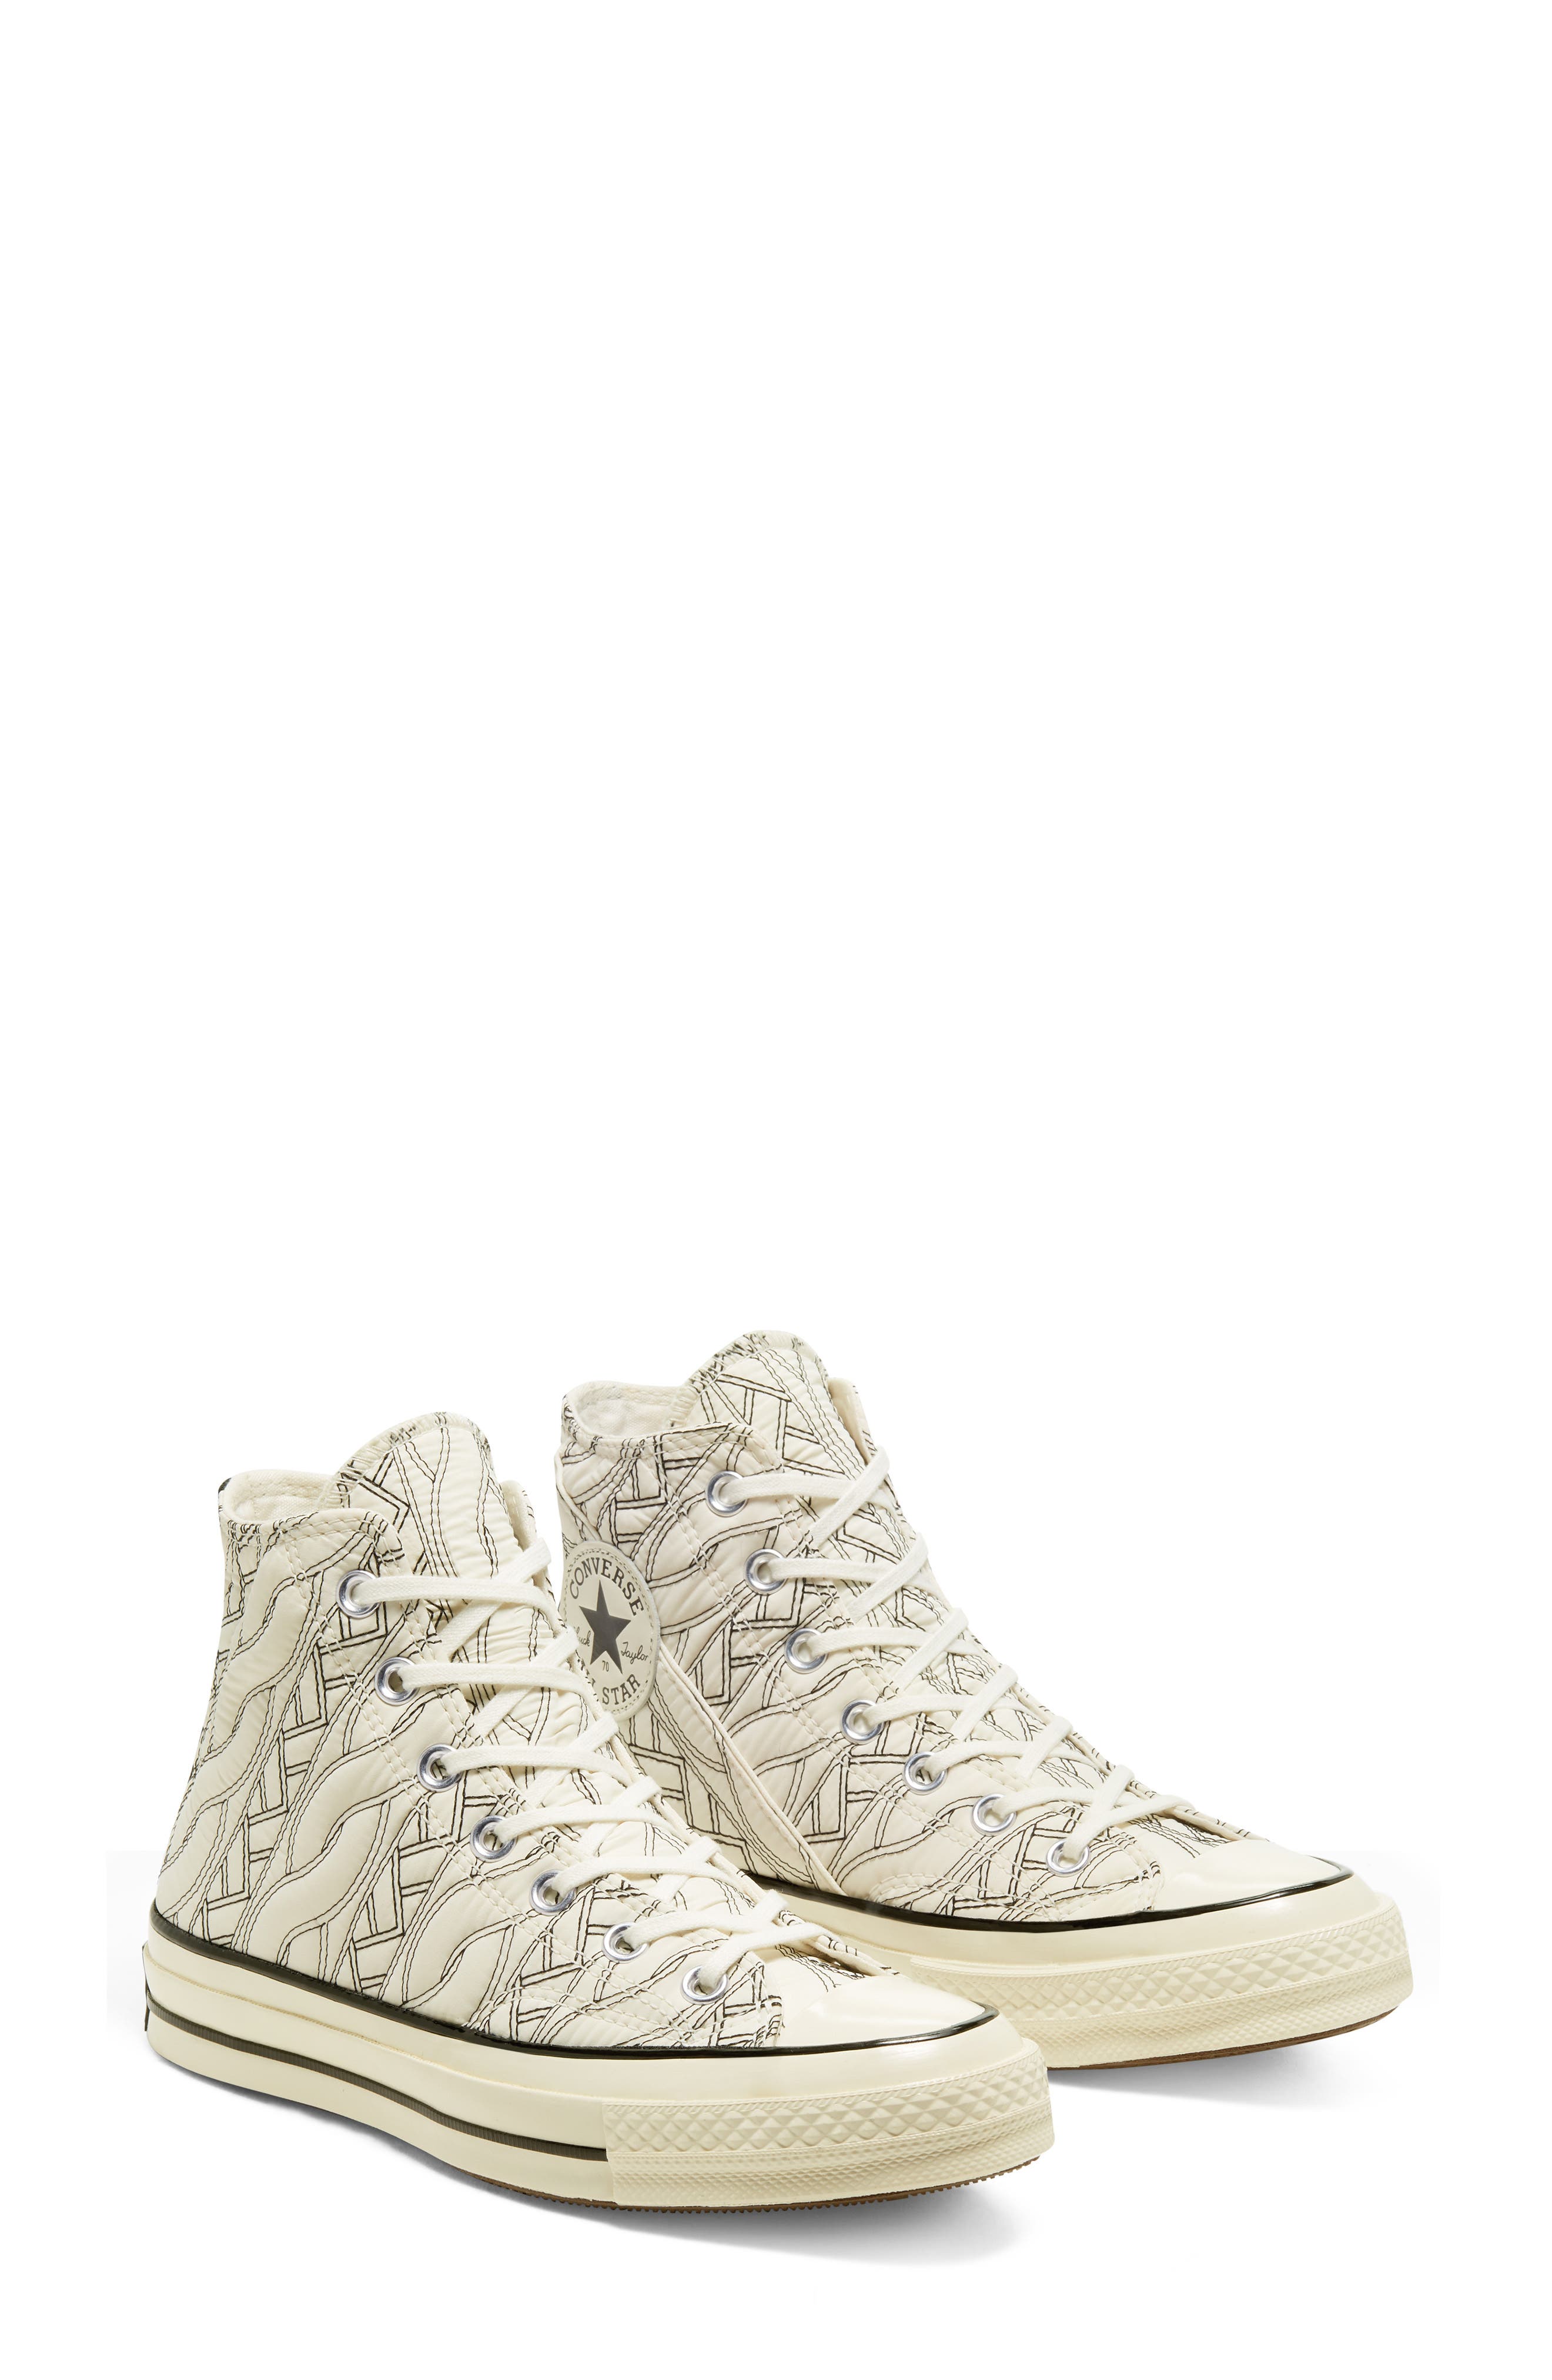 converse chuck taylor all star quilted ox